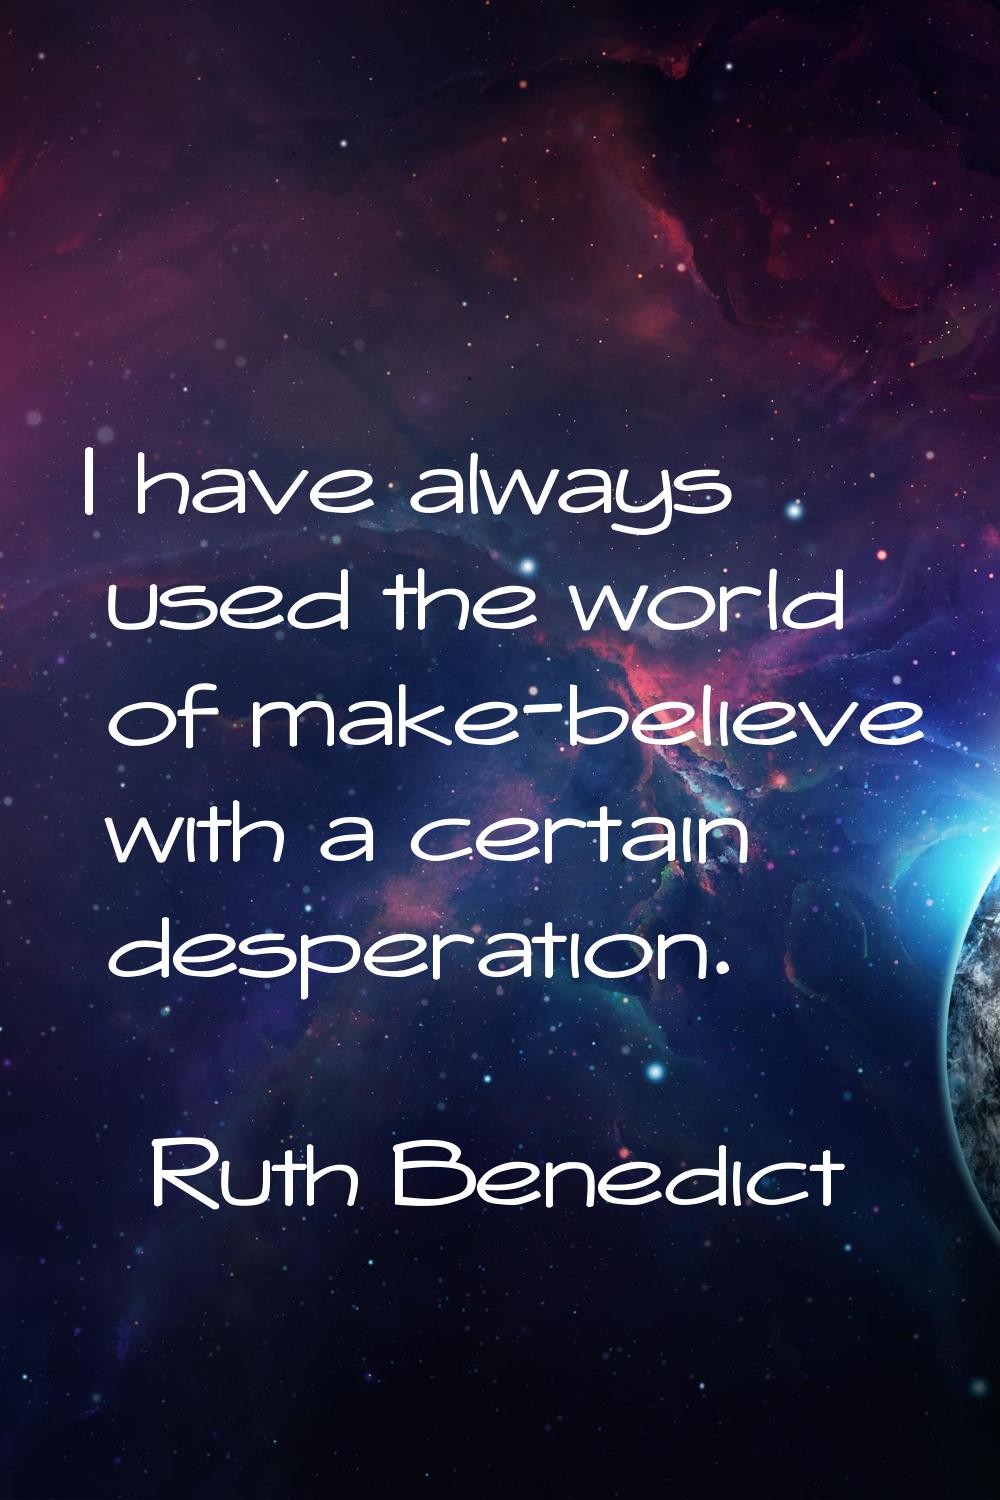 I have always used the world of make-believe with a certain desperation.